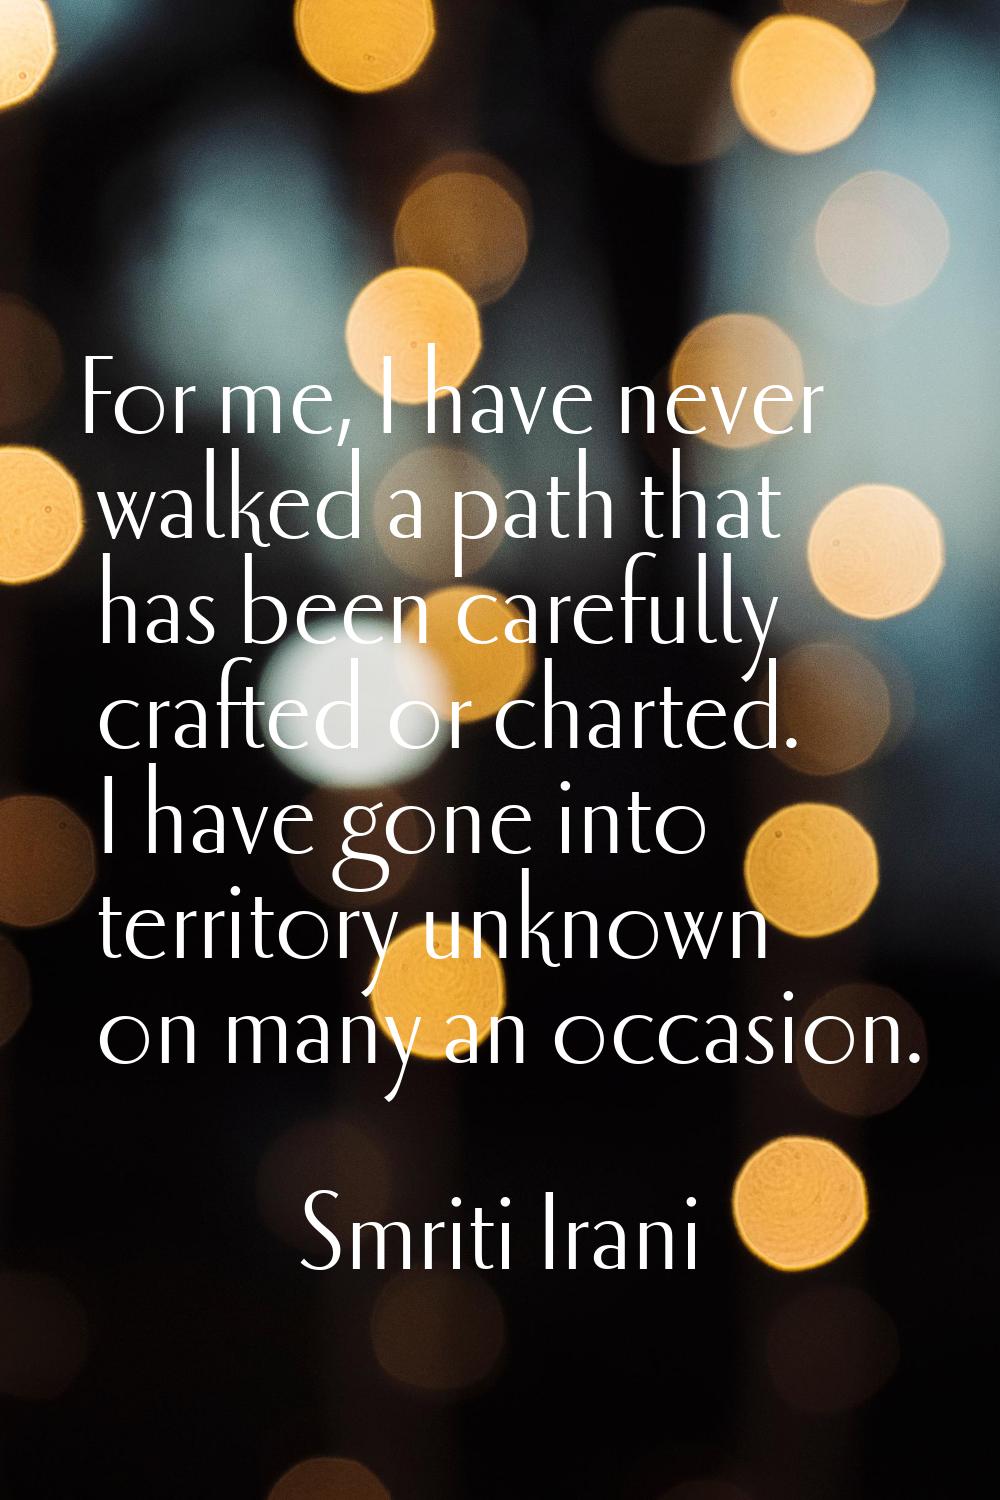 For me, I have never walked a path that has been carefully crafted or charted. I have gone into ter